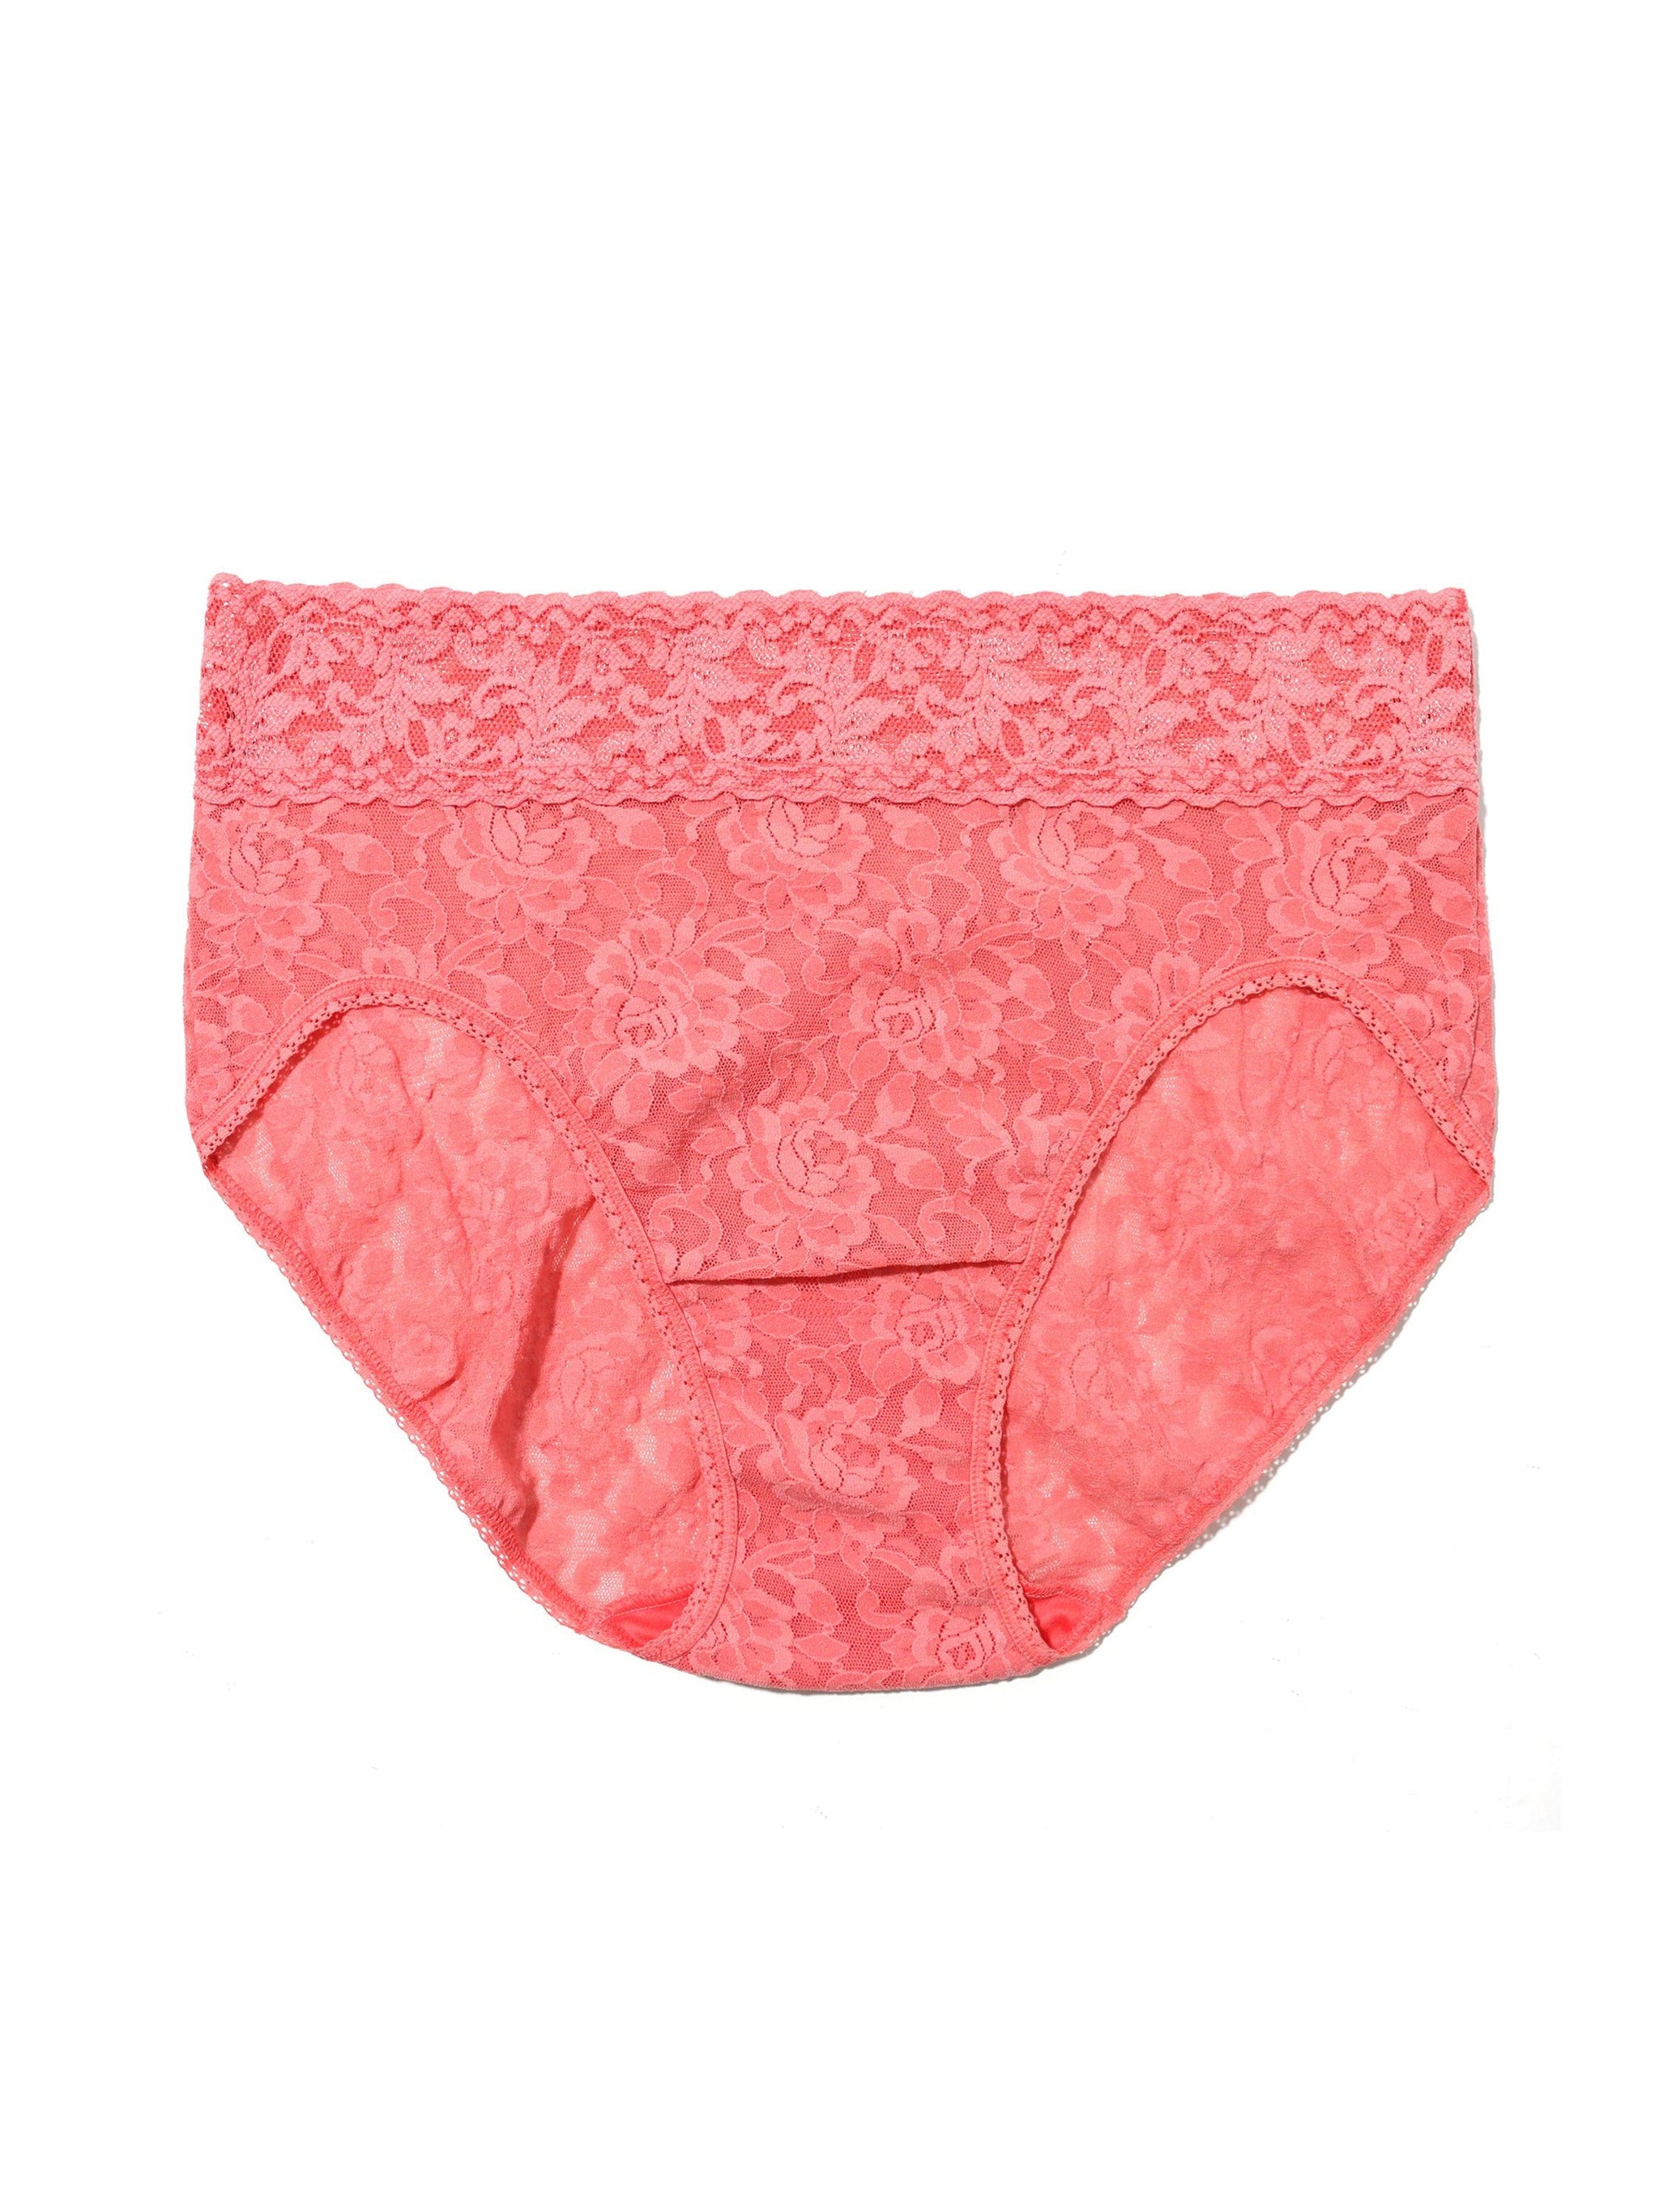 Signature Lace French Brief Guava Pink Sale